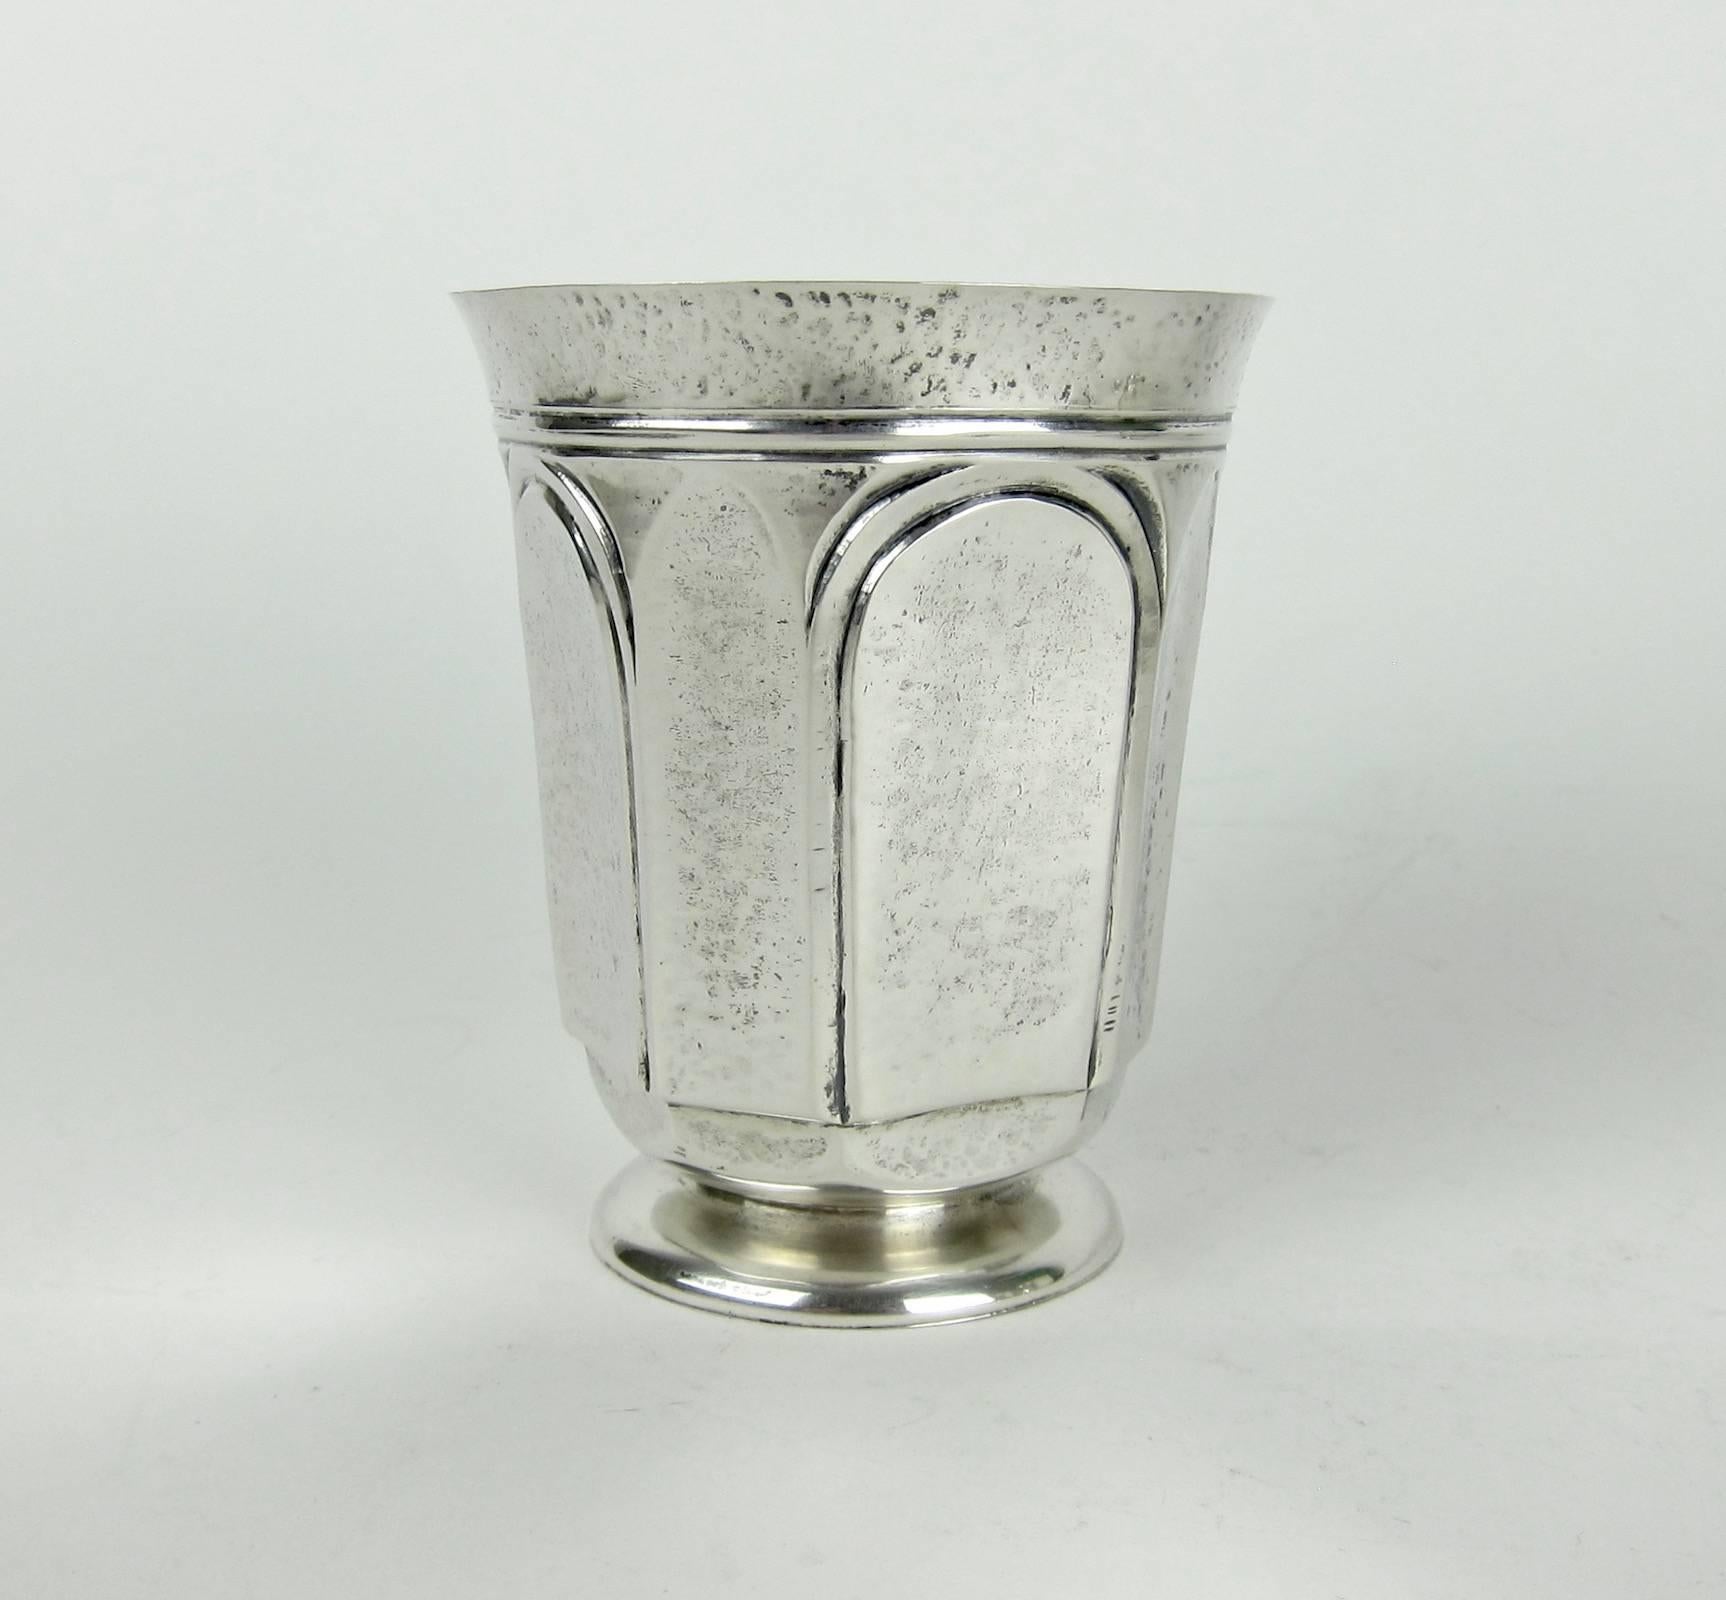 Handsome and heavy antique sterling silver tumblers or julep cups from the Arts and Crafts period by Marie Zimmermann (1879-1972), a noted American metalsmith, jeweler and designer working in New York City during the opening decades of the 20th